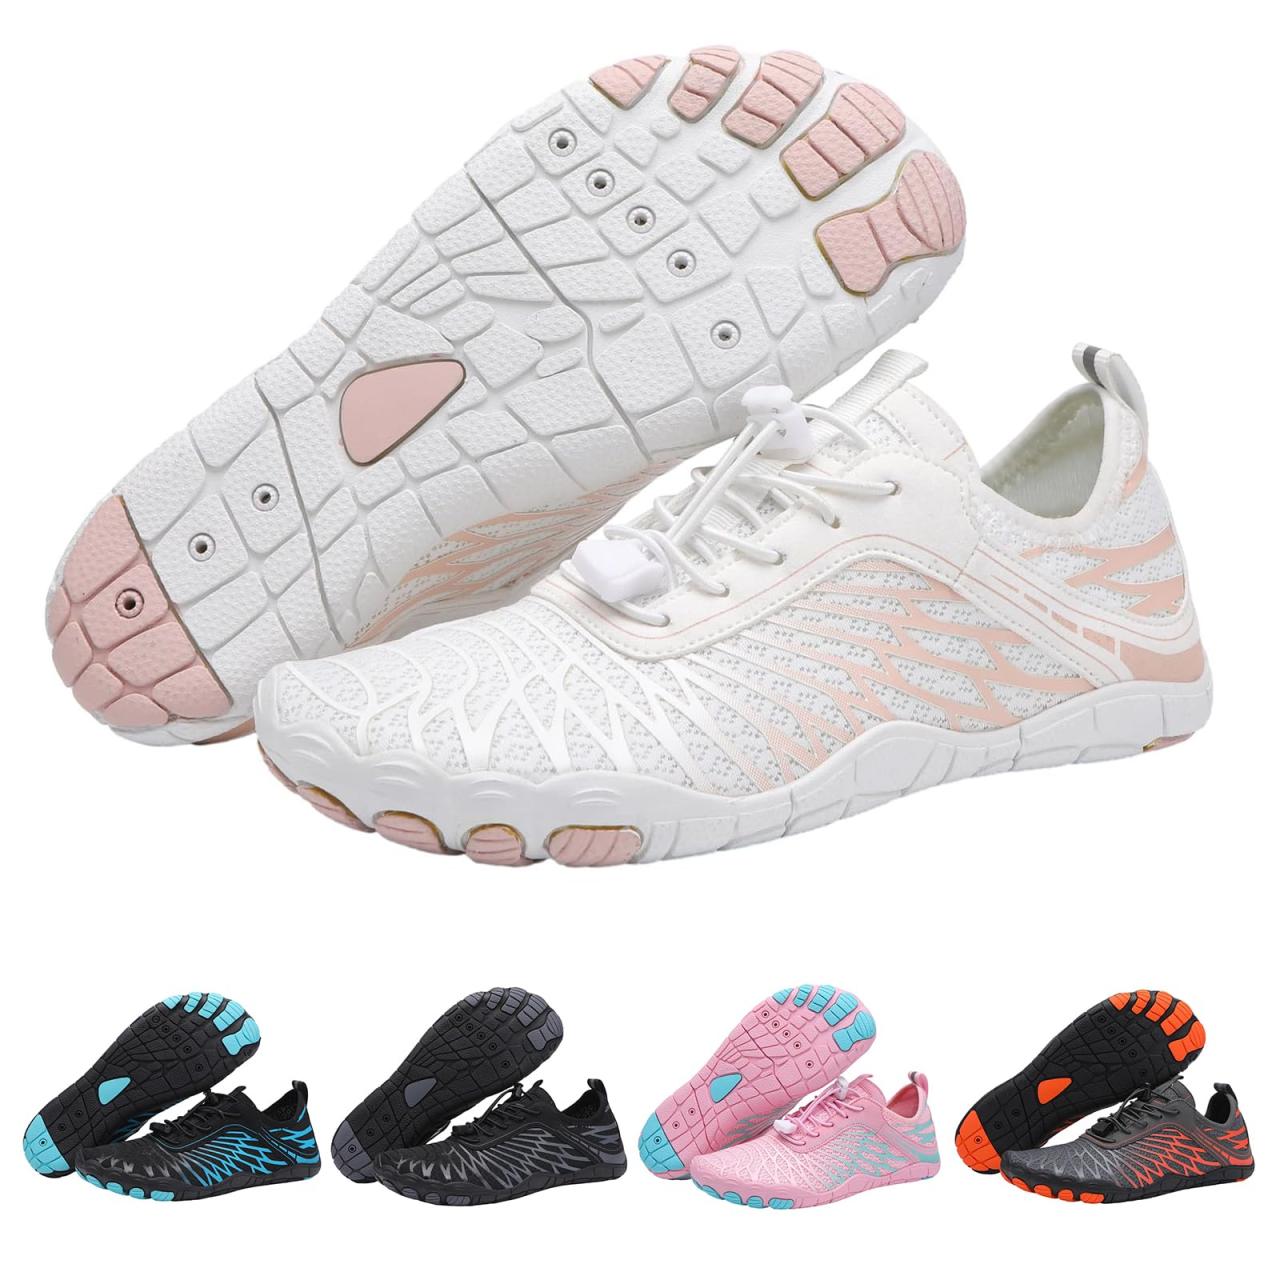 Lorax Pro Barefoot Shoes for Women